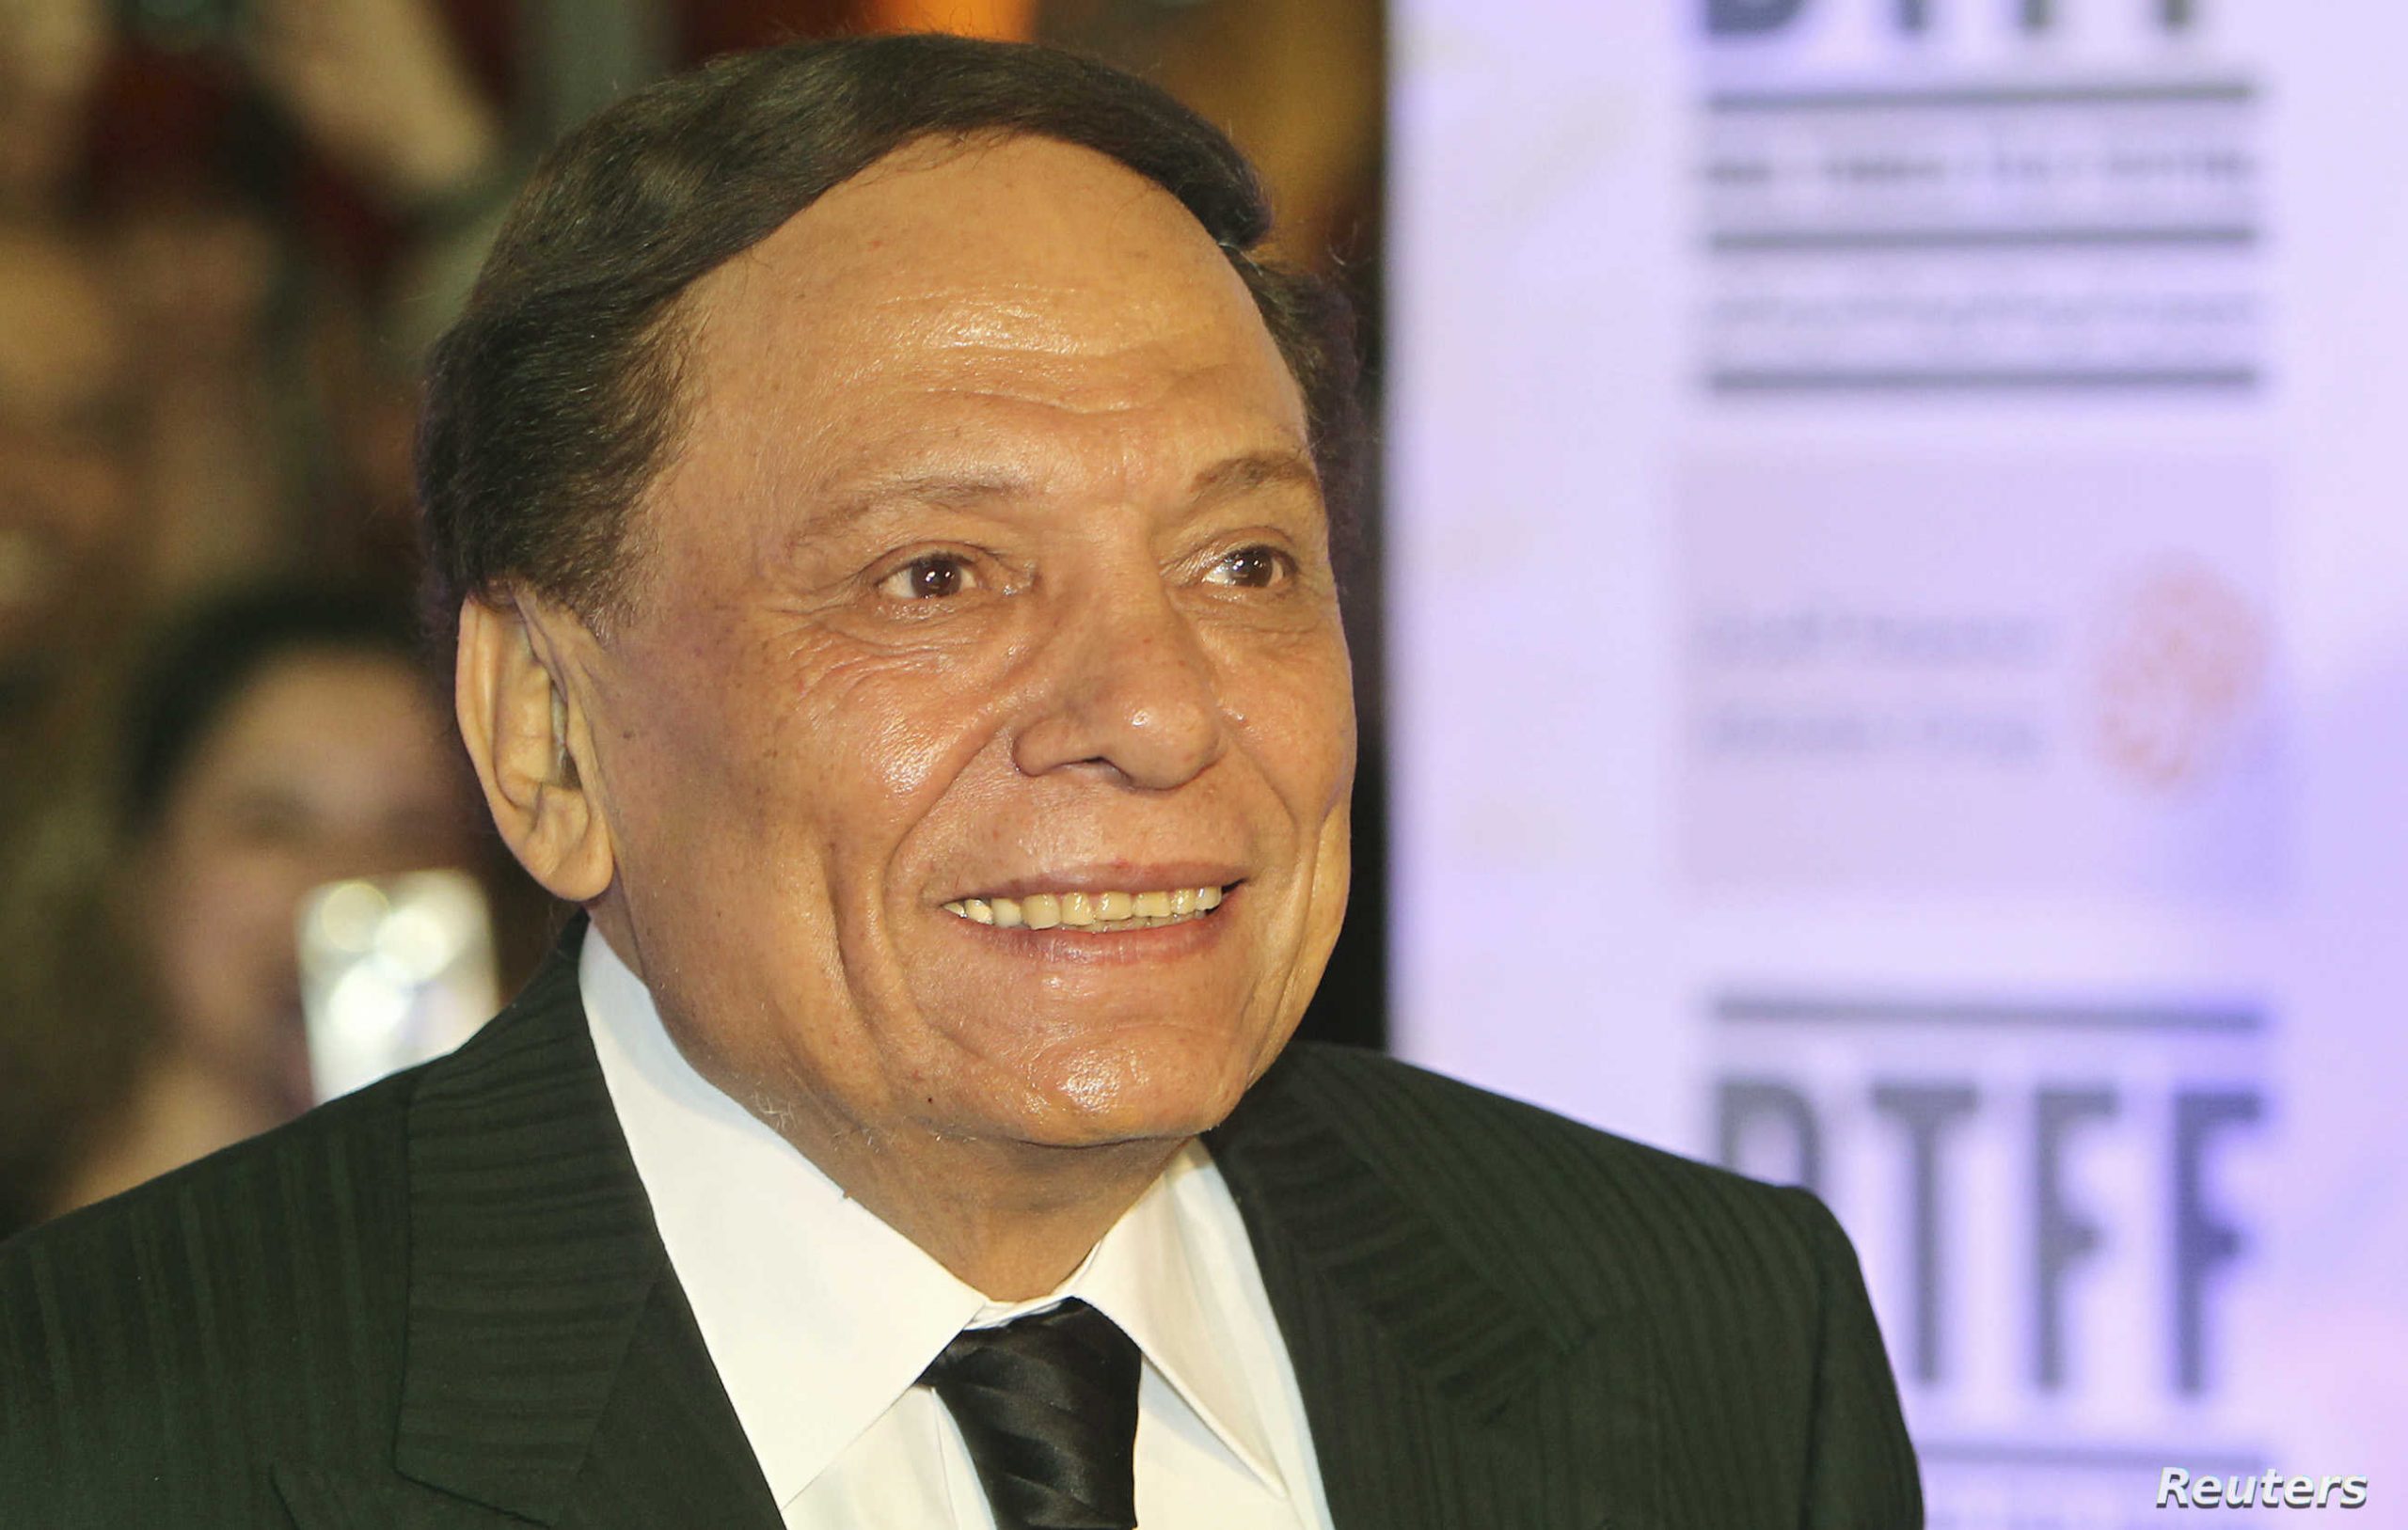 Actor Adel Imam attends the Opening Night Gala during the 2010 Doha Tribeca Film Festival in Doha October 26, 2010. REUTERS/Mohammed Dabbous (QATAR - Tags: ENTERTAINMENT)